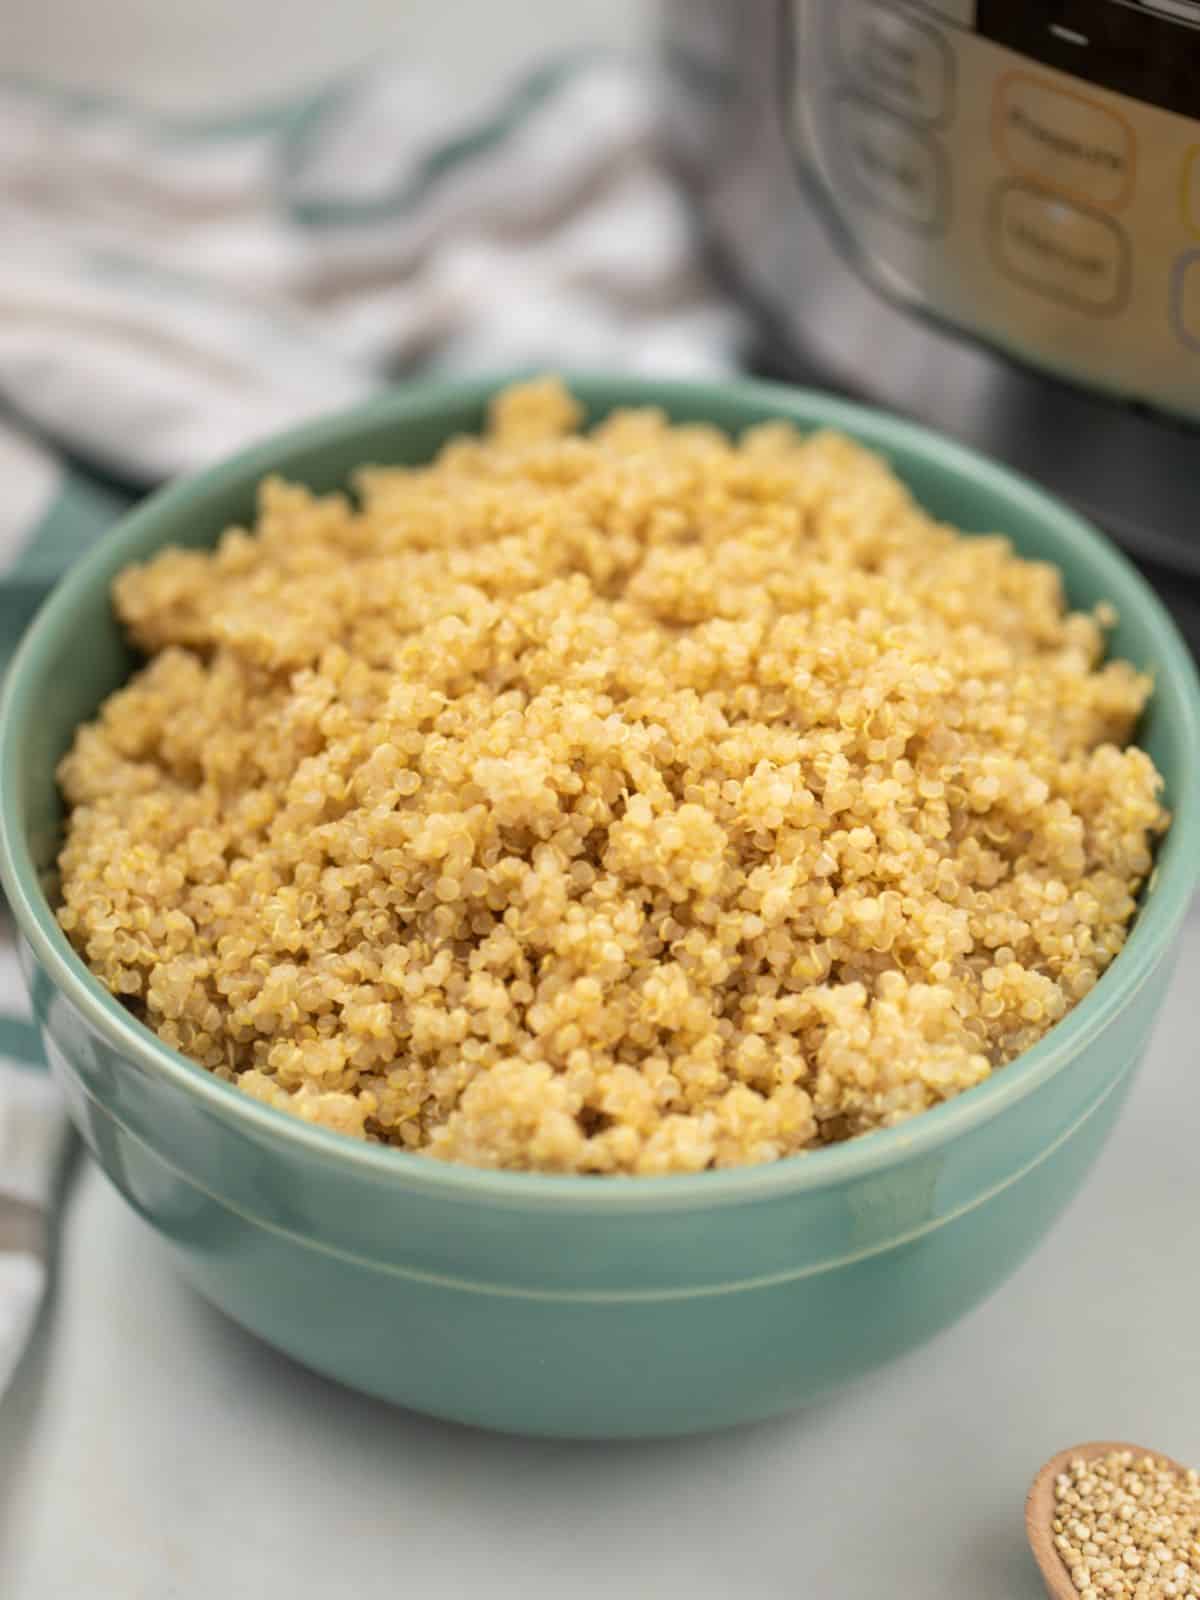 Cooked quinoa in a bowl in front of the Instant Pot.